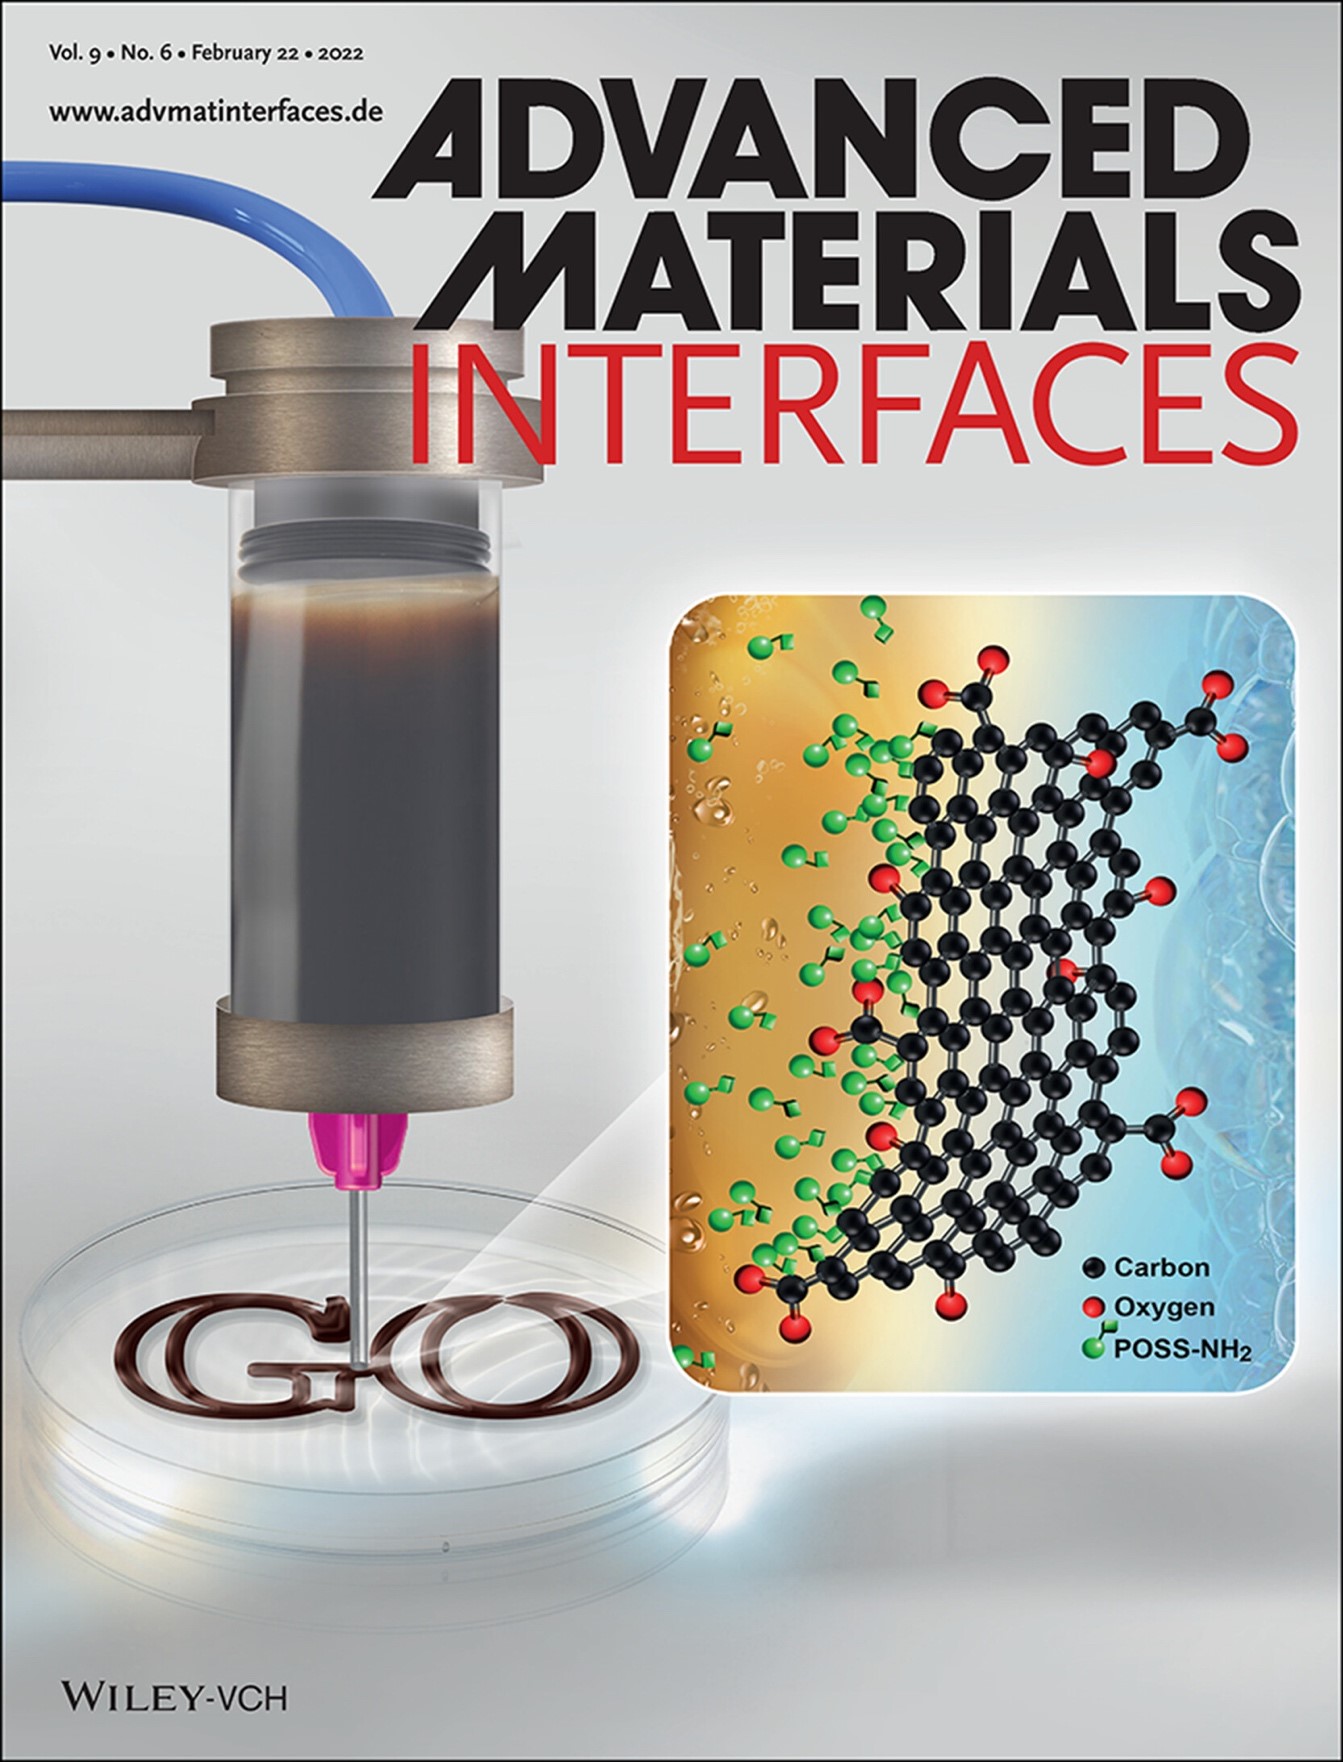 The cover of the Febuary 22nd 2022 edition of Advances Materials Interfaces